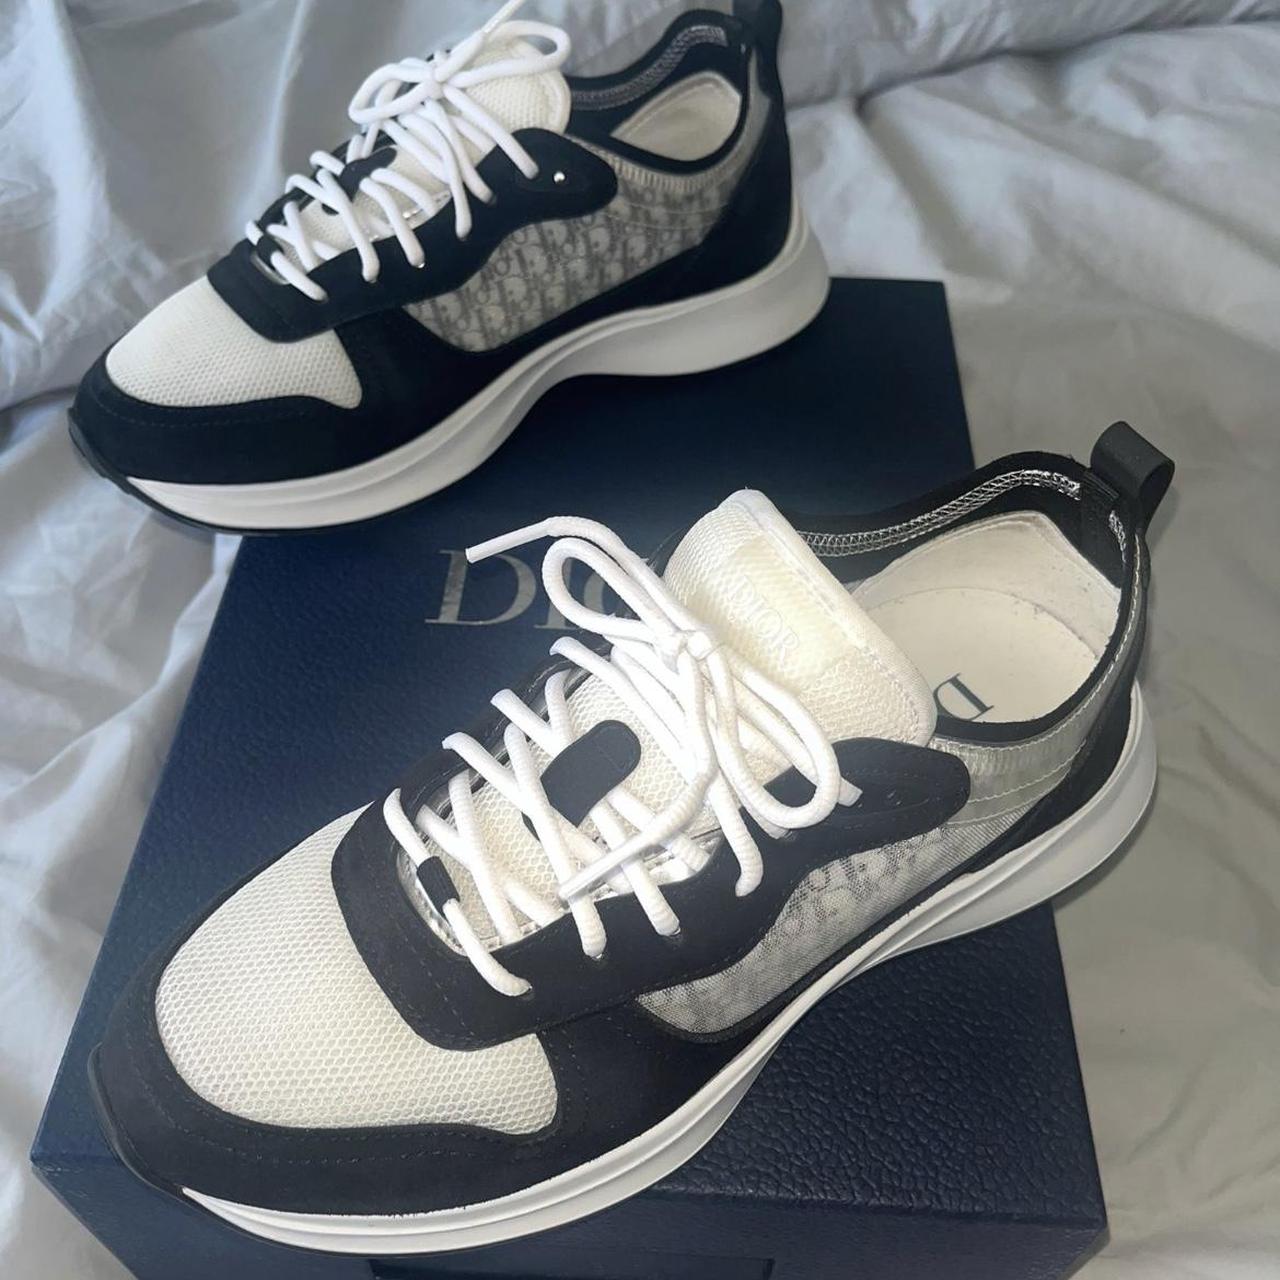 Christian Dior Men's White and Navy Trainers | Depop